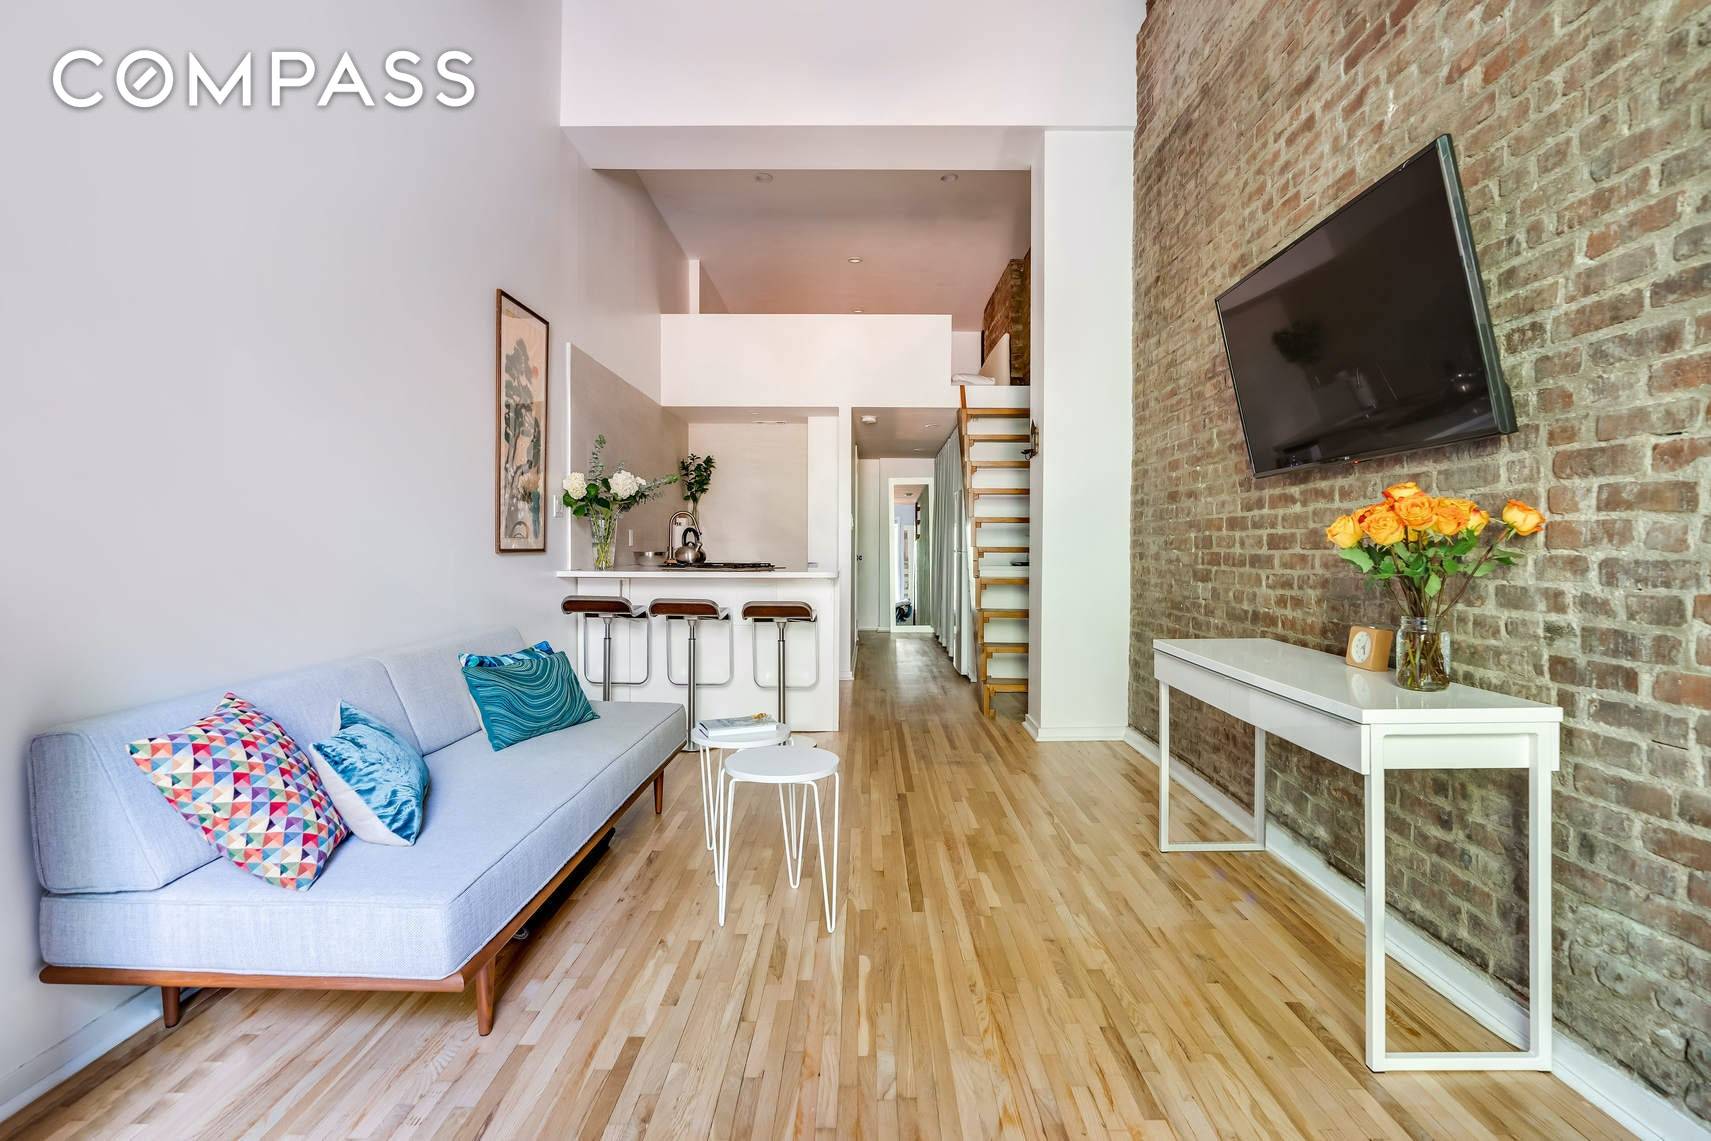 CLASSIC WEST CHELSEA BROWNSTONE WITH CONDO LIKE RULES AND A VERY FLEXIBLE SUBLET POLICY.